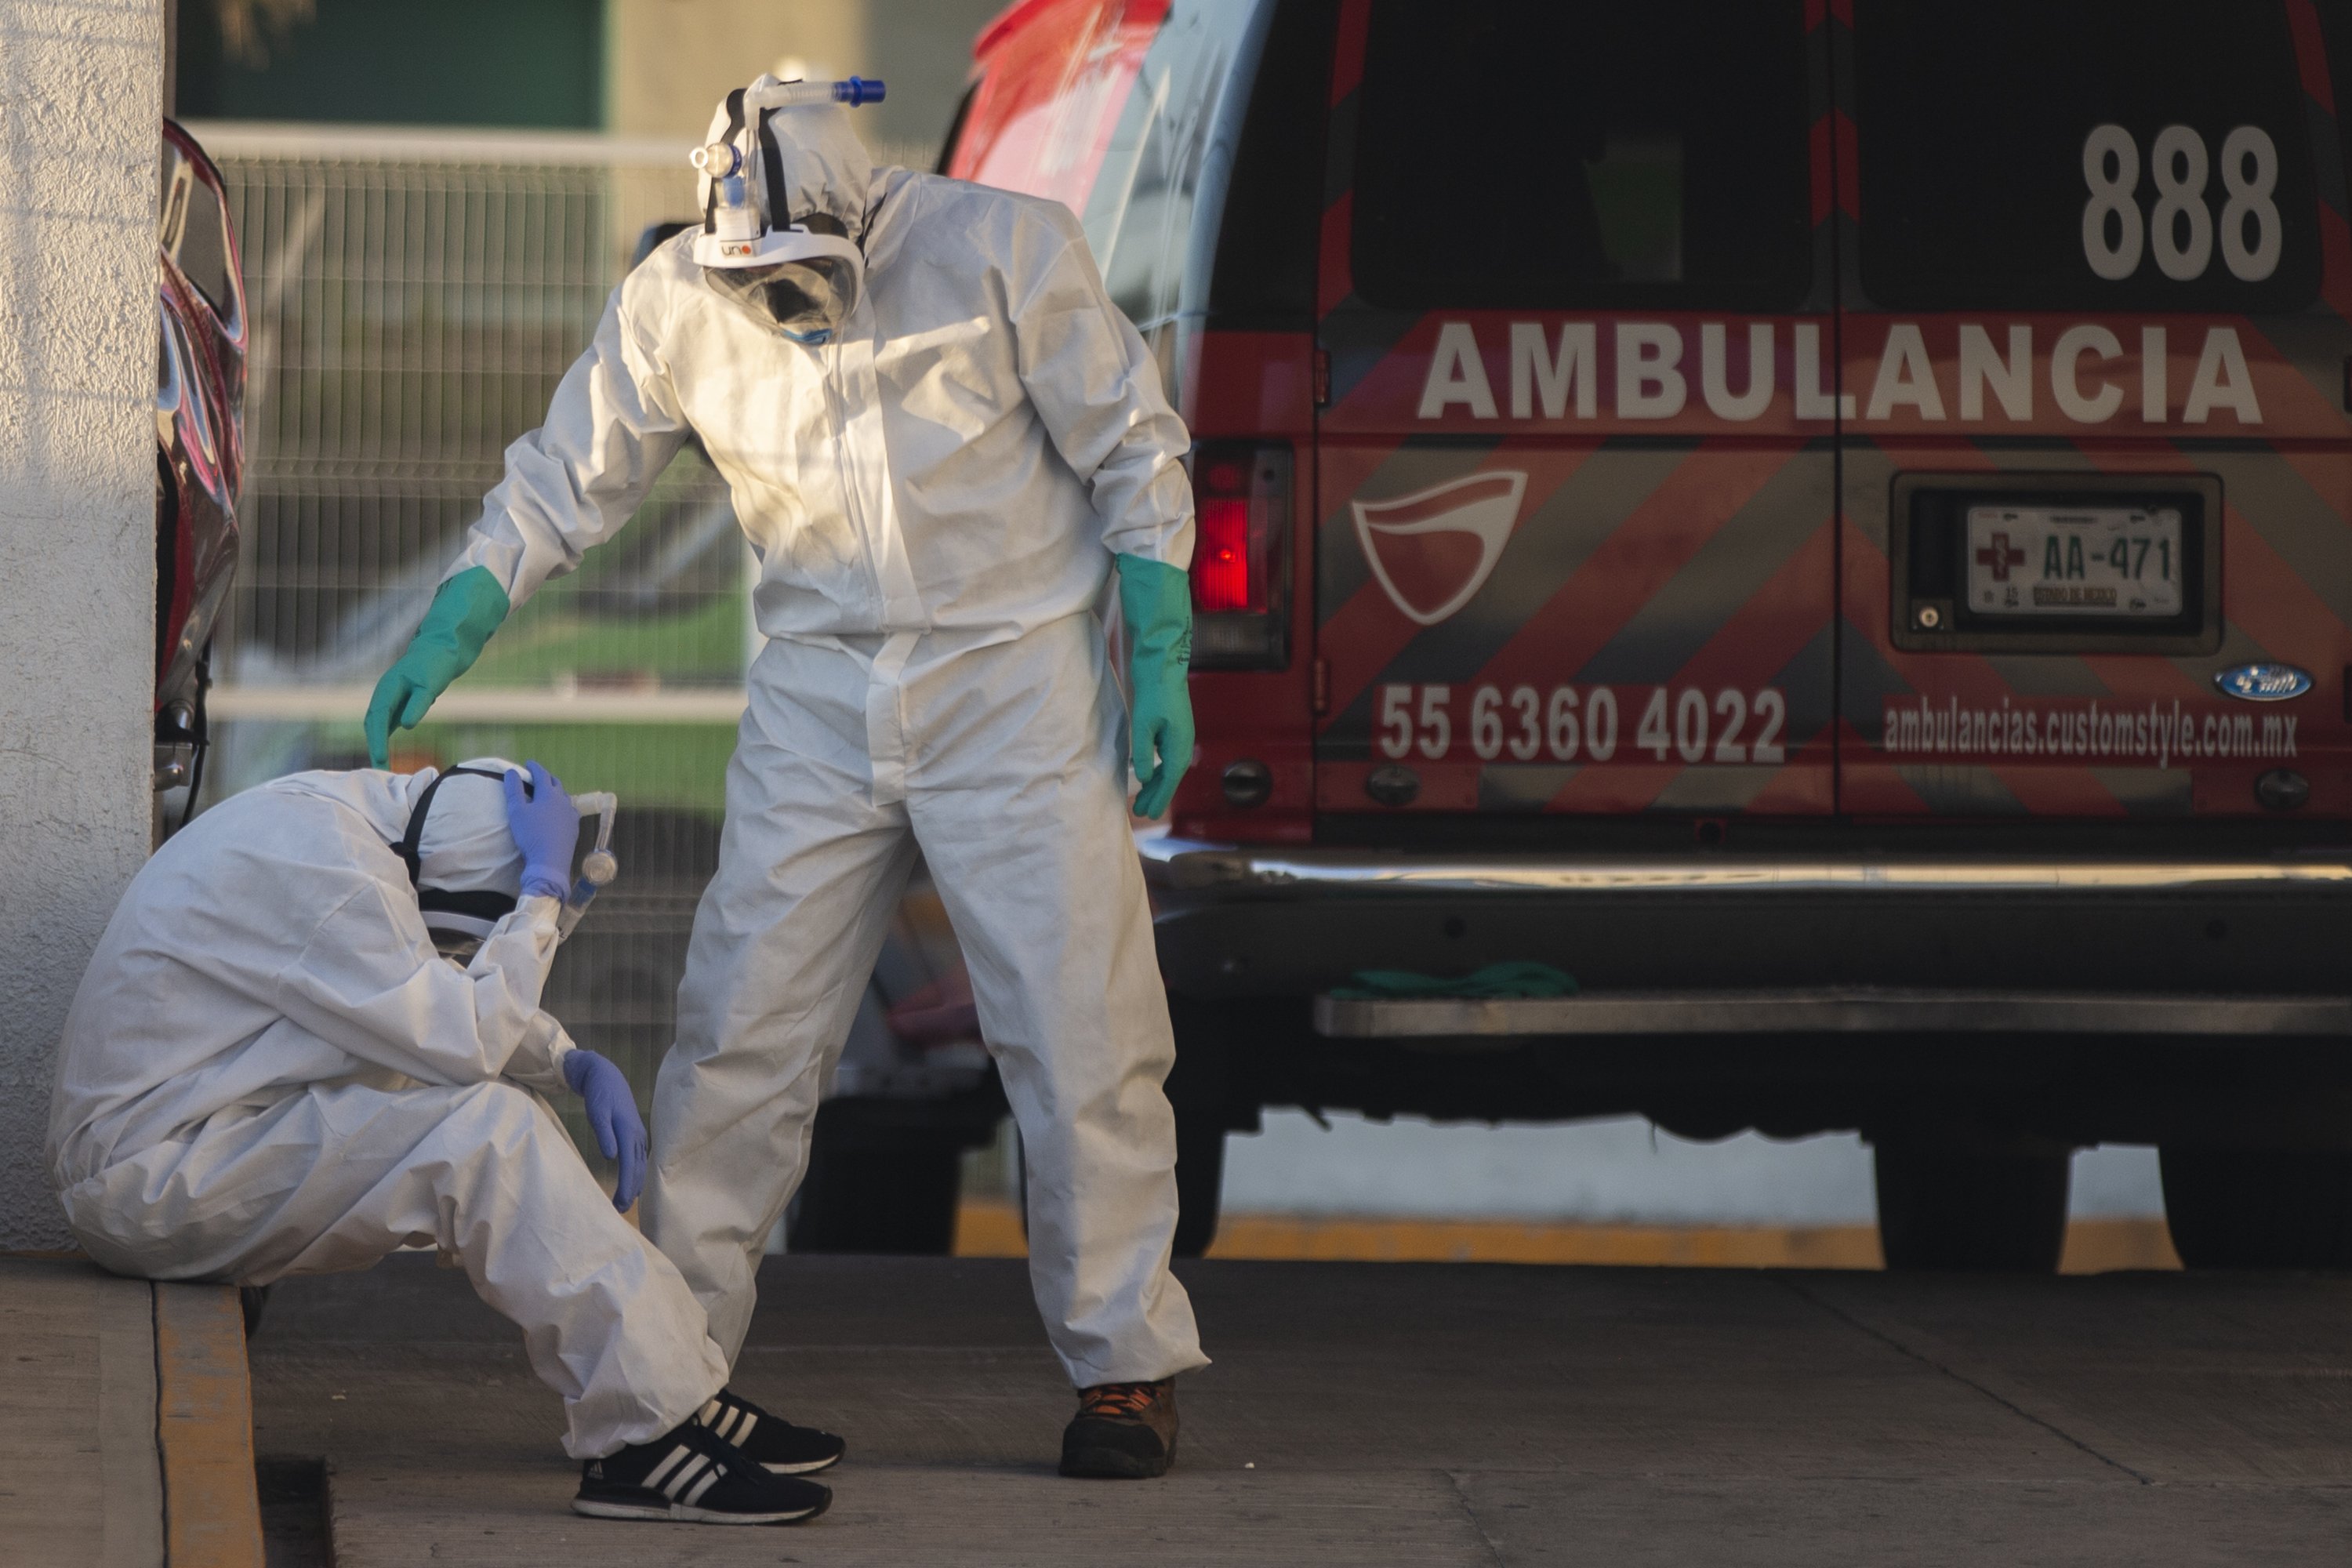 A paramedic puts his hands to his head while at the emergency entrance of the Hospital de las Américas in Ecatepec on May 2, 2020, in Mexico City, Mexico. | Source: Getty Images.